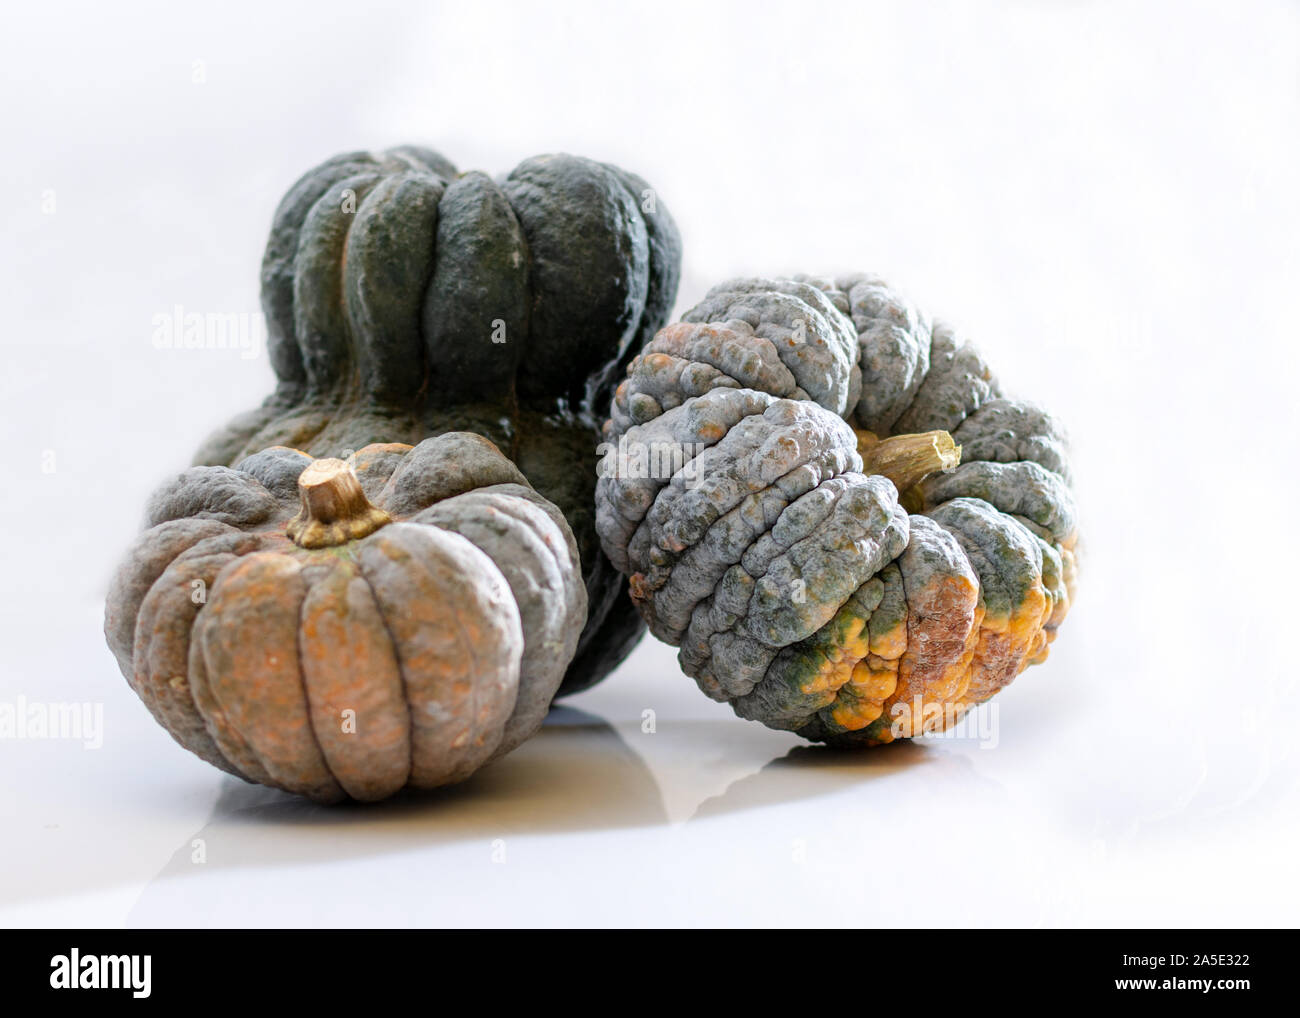 pumpkins whole and cut Stock Photo